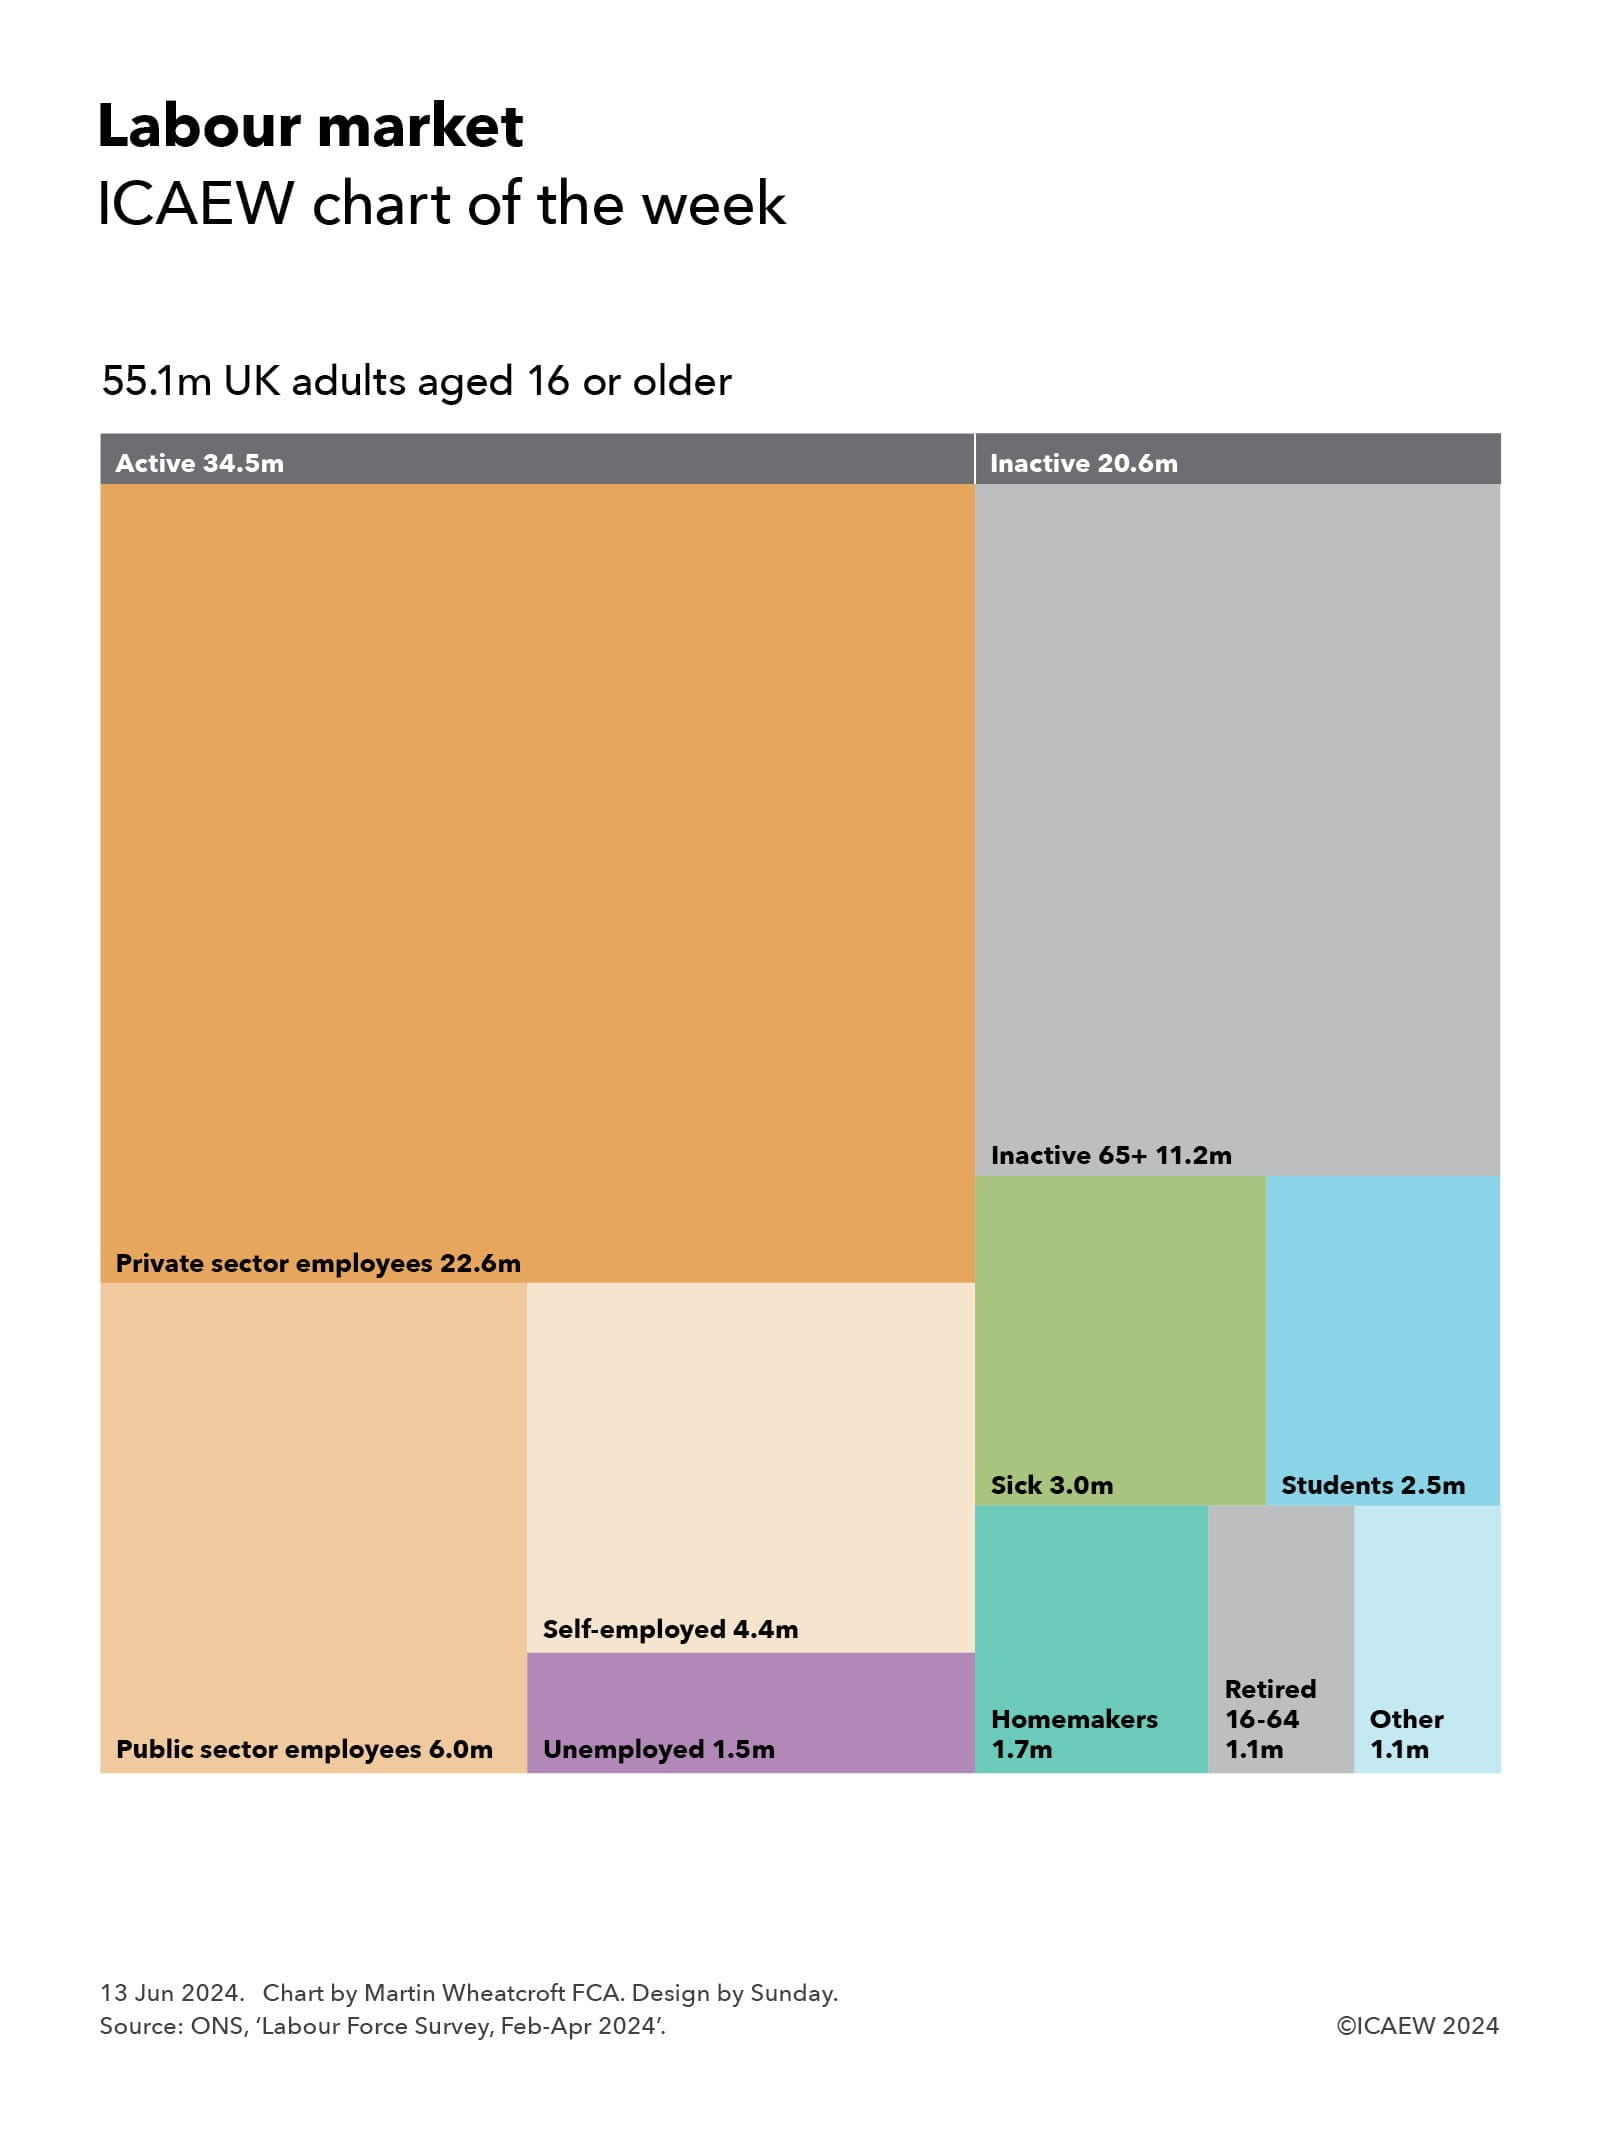 A breakdown of the employment status of the 55.1 million adults aged 16 or over in the UK based on the ONS 'Labour Force Survey' Feb-Apr 2024